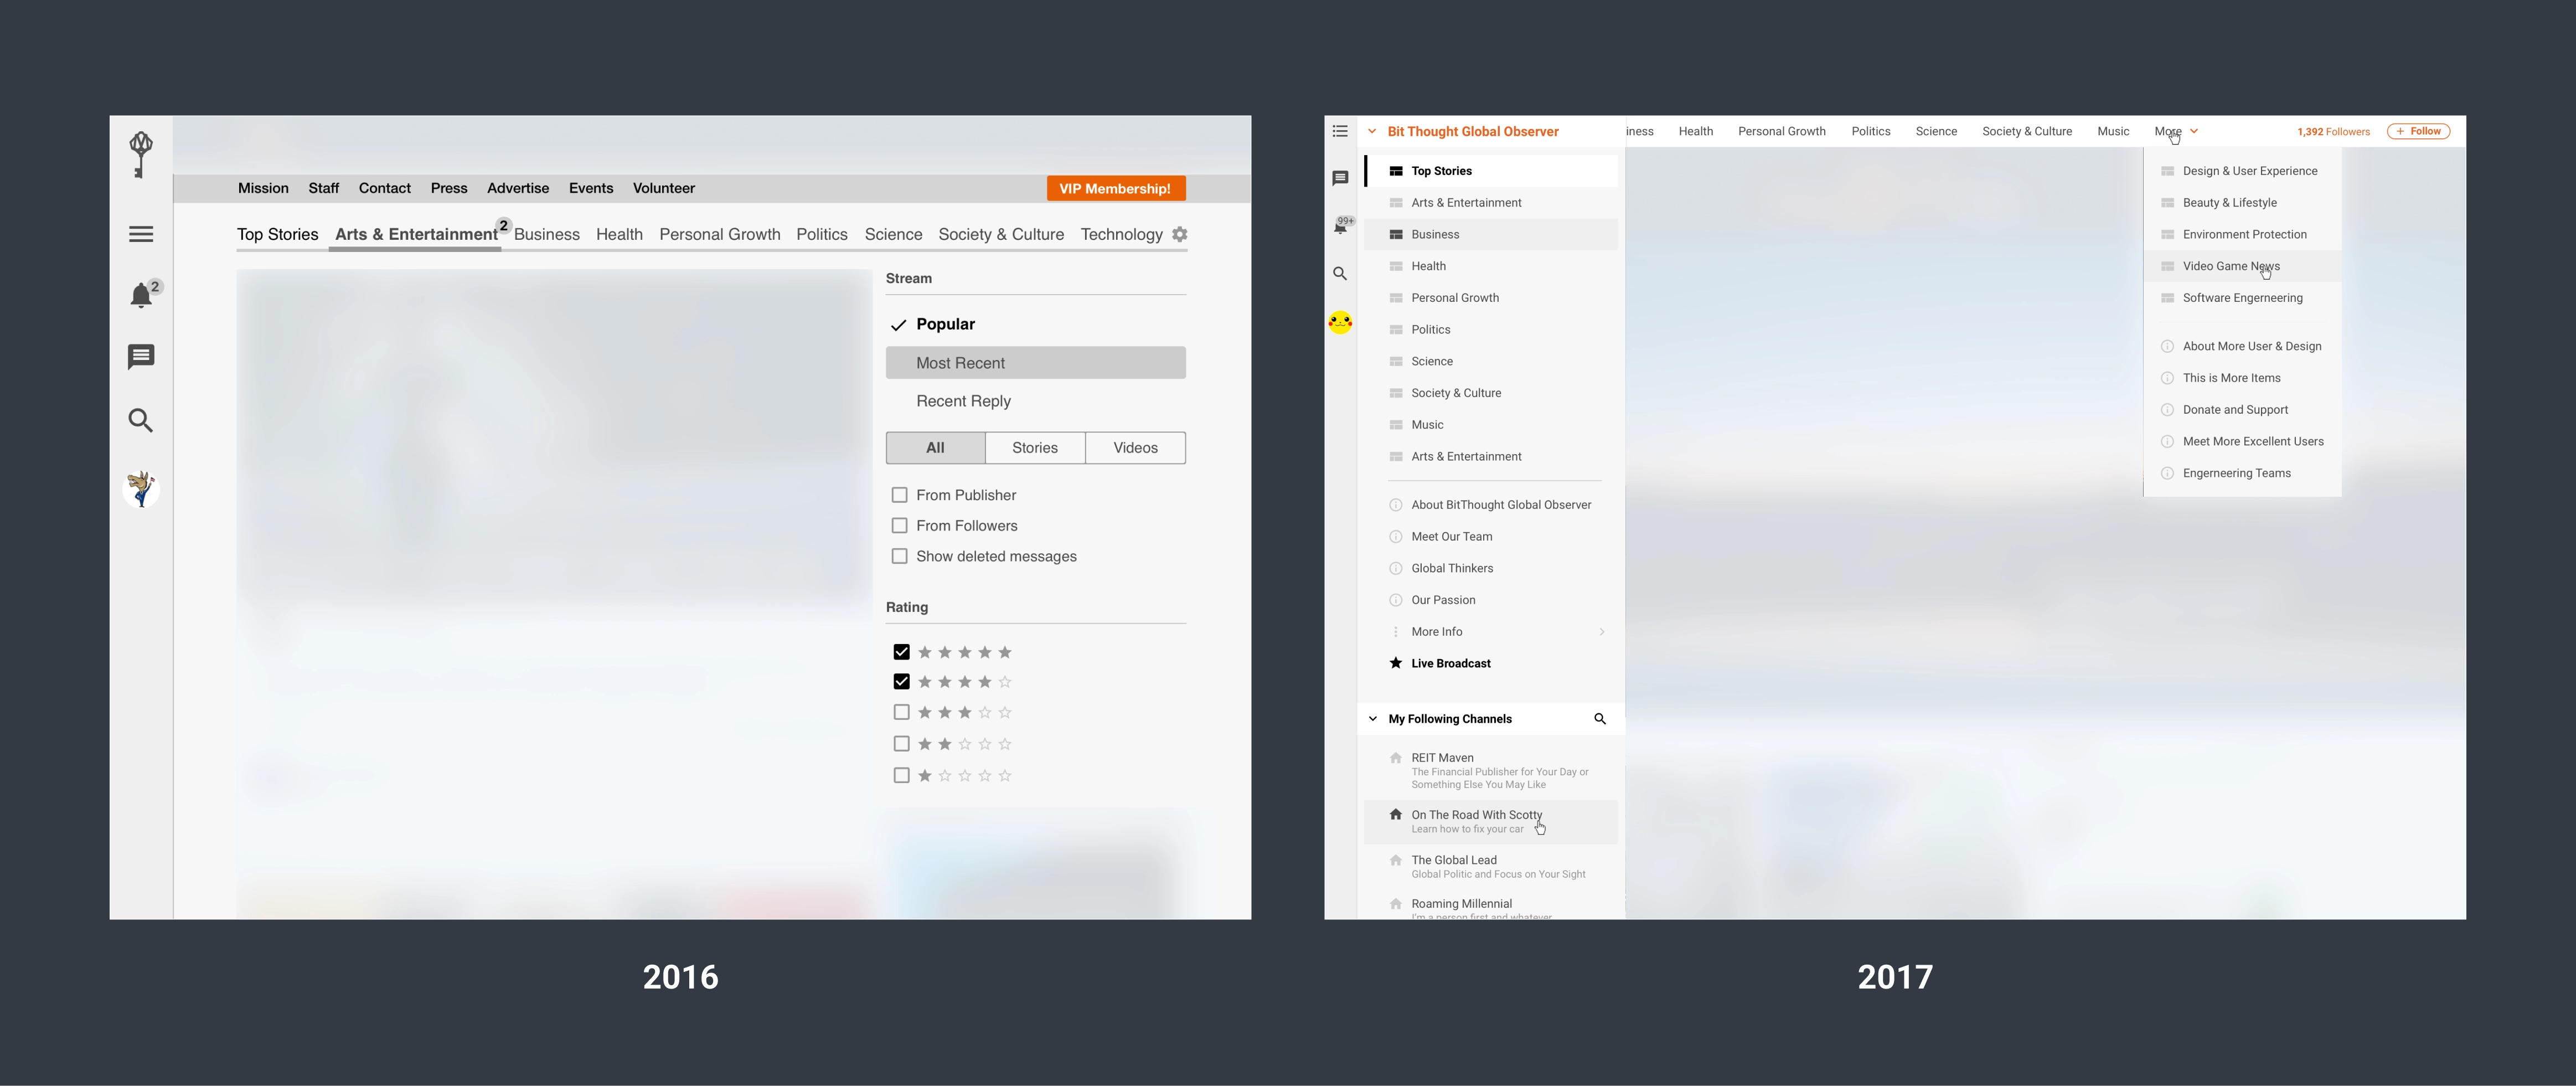 Our early navigation approaches: Additional Design Tasks - showcase image